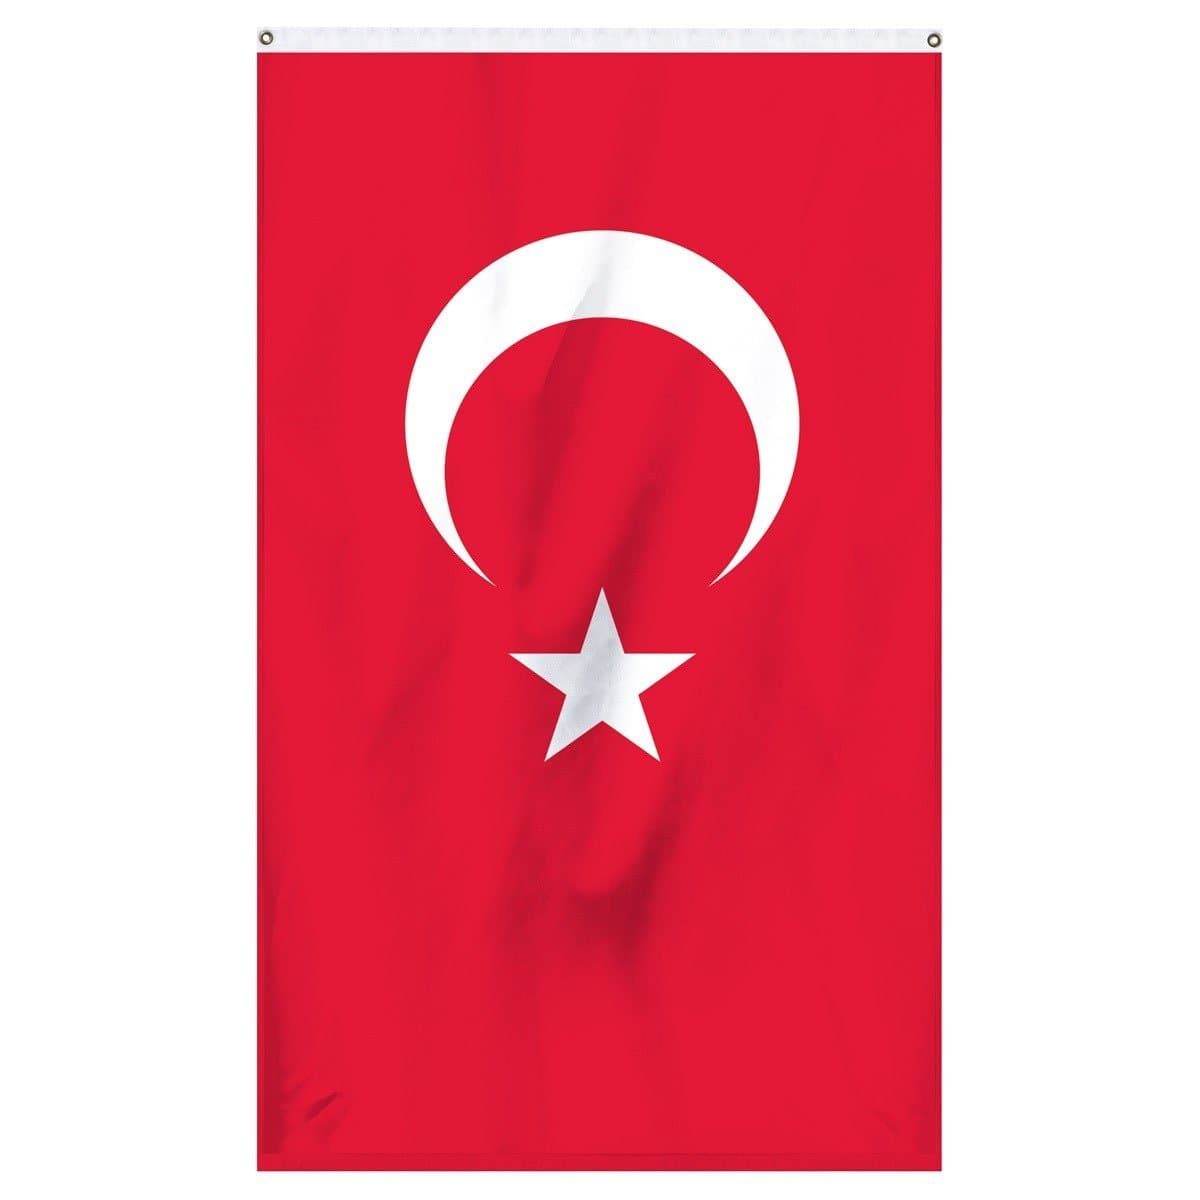 Turkey National Flag for sale to buy online from Atlantic Flag and Pole. Red flag with a white crescent moon and white star.